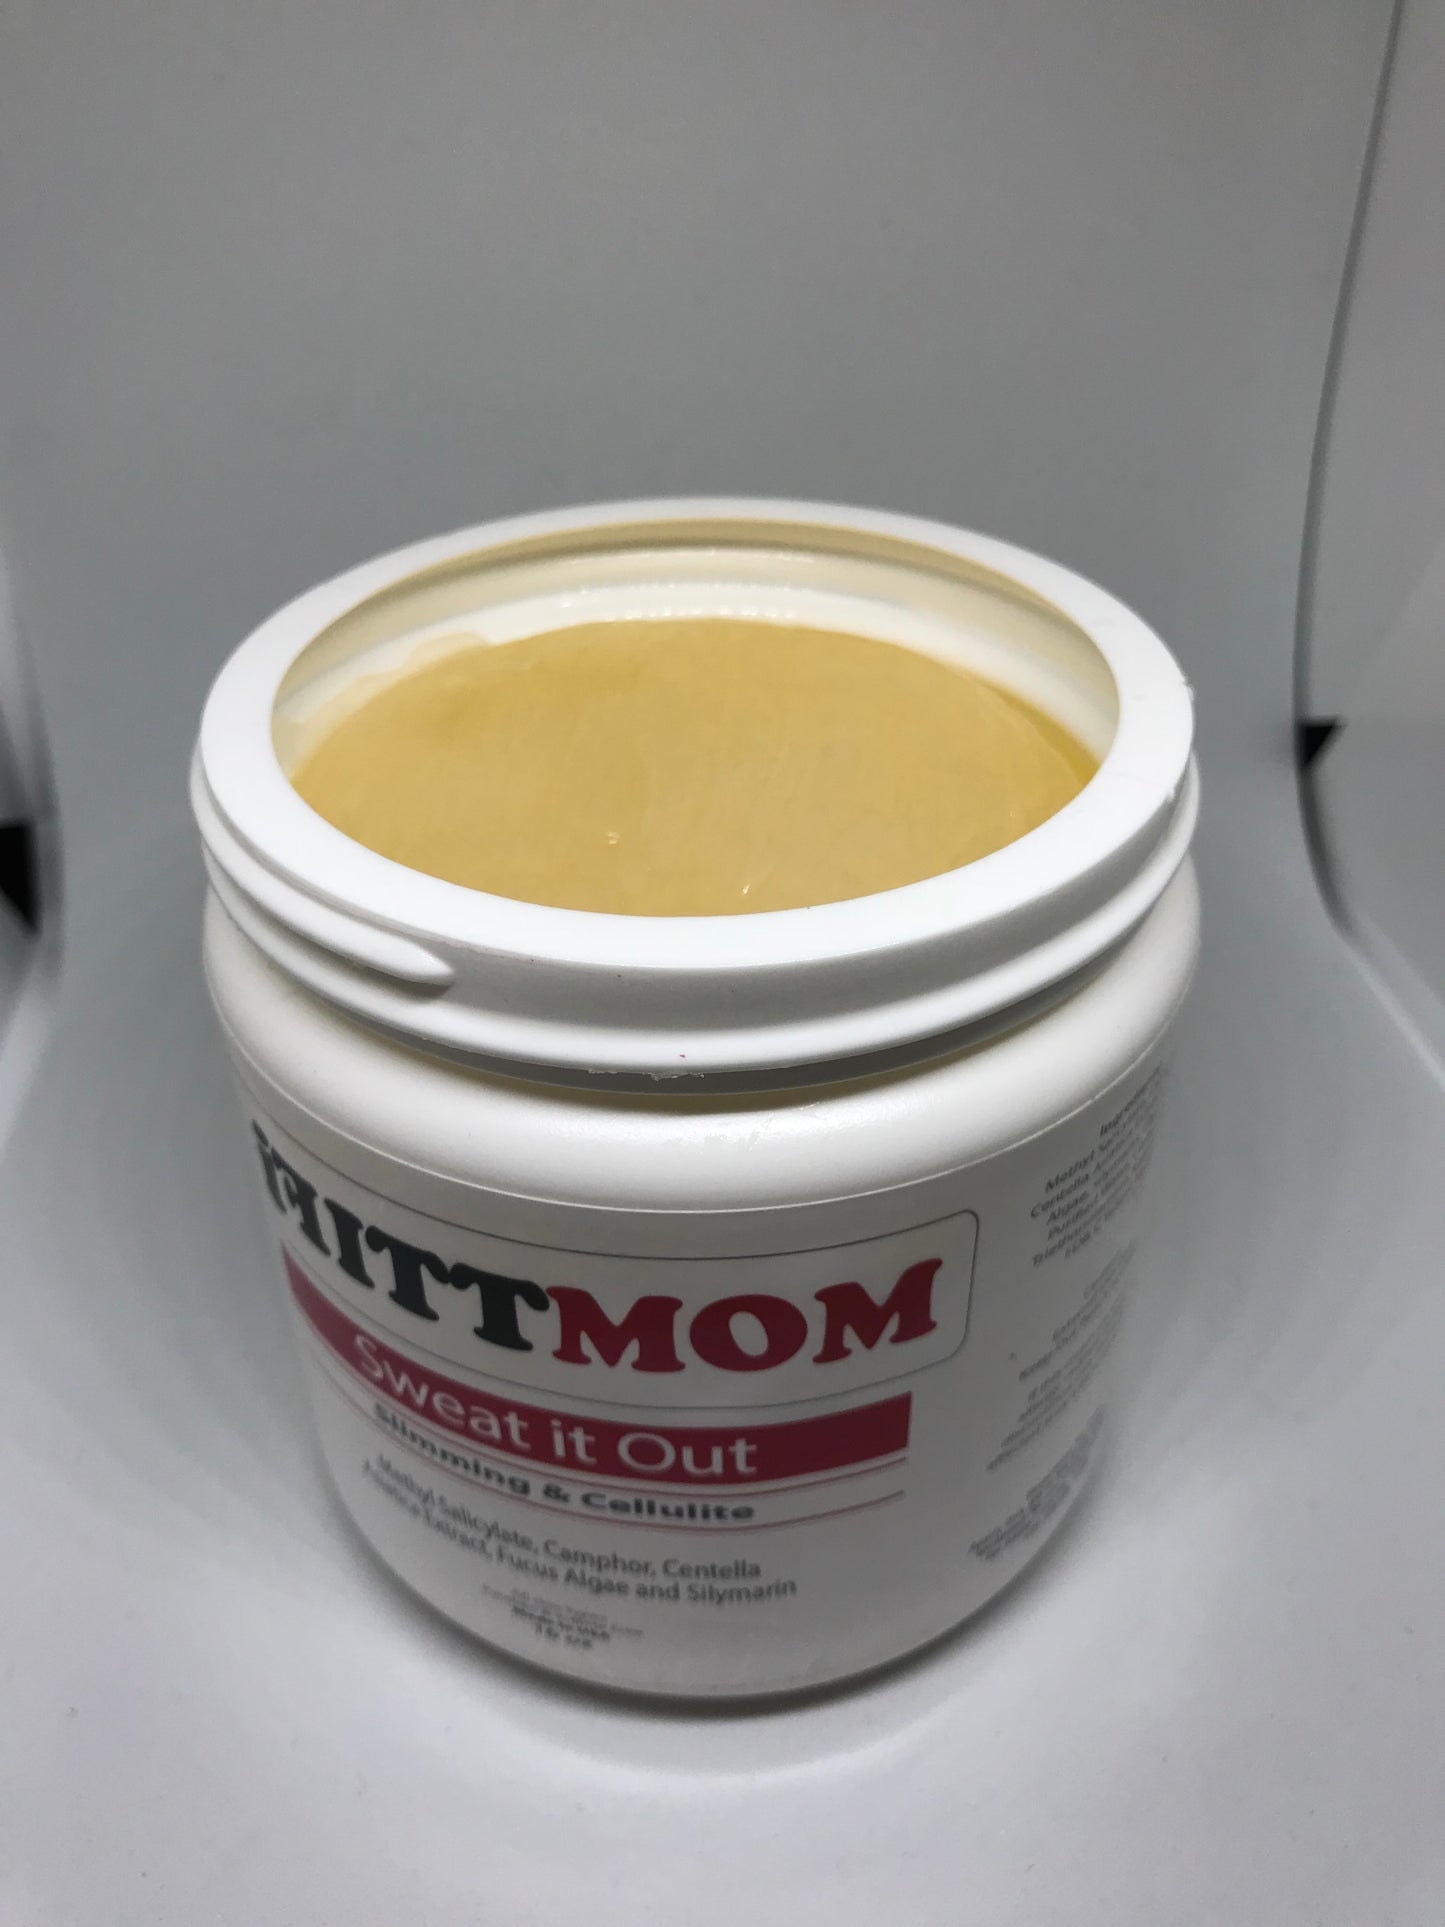 IFITTMOM Sweat it Out Gel